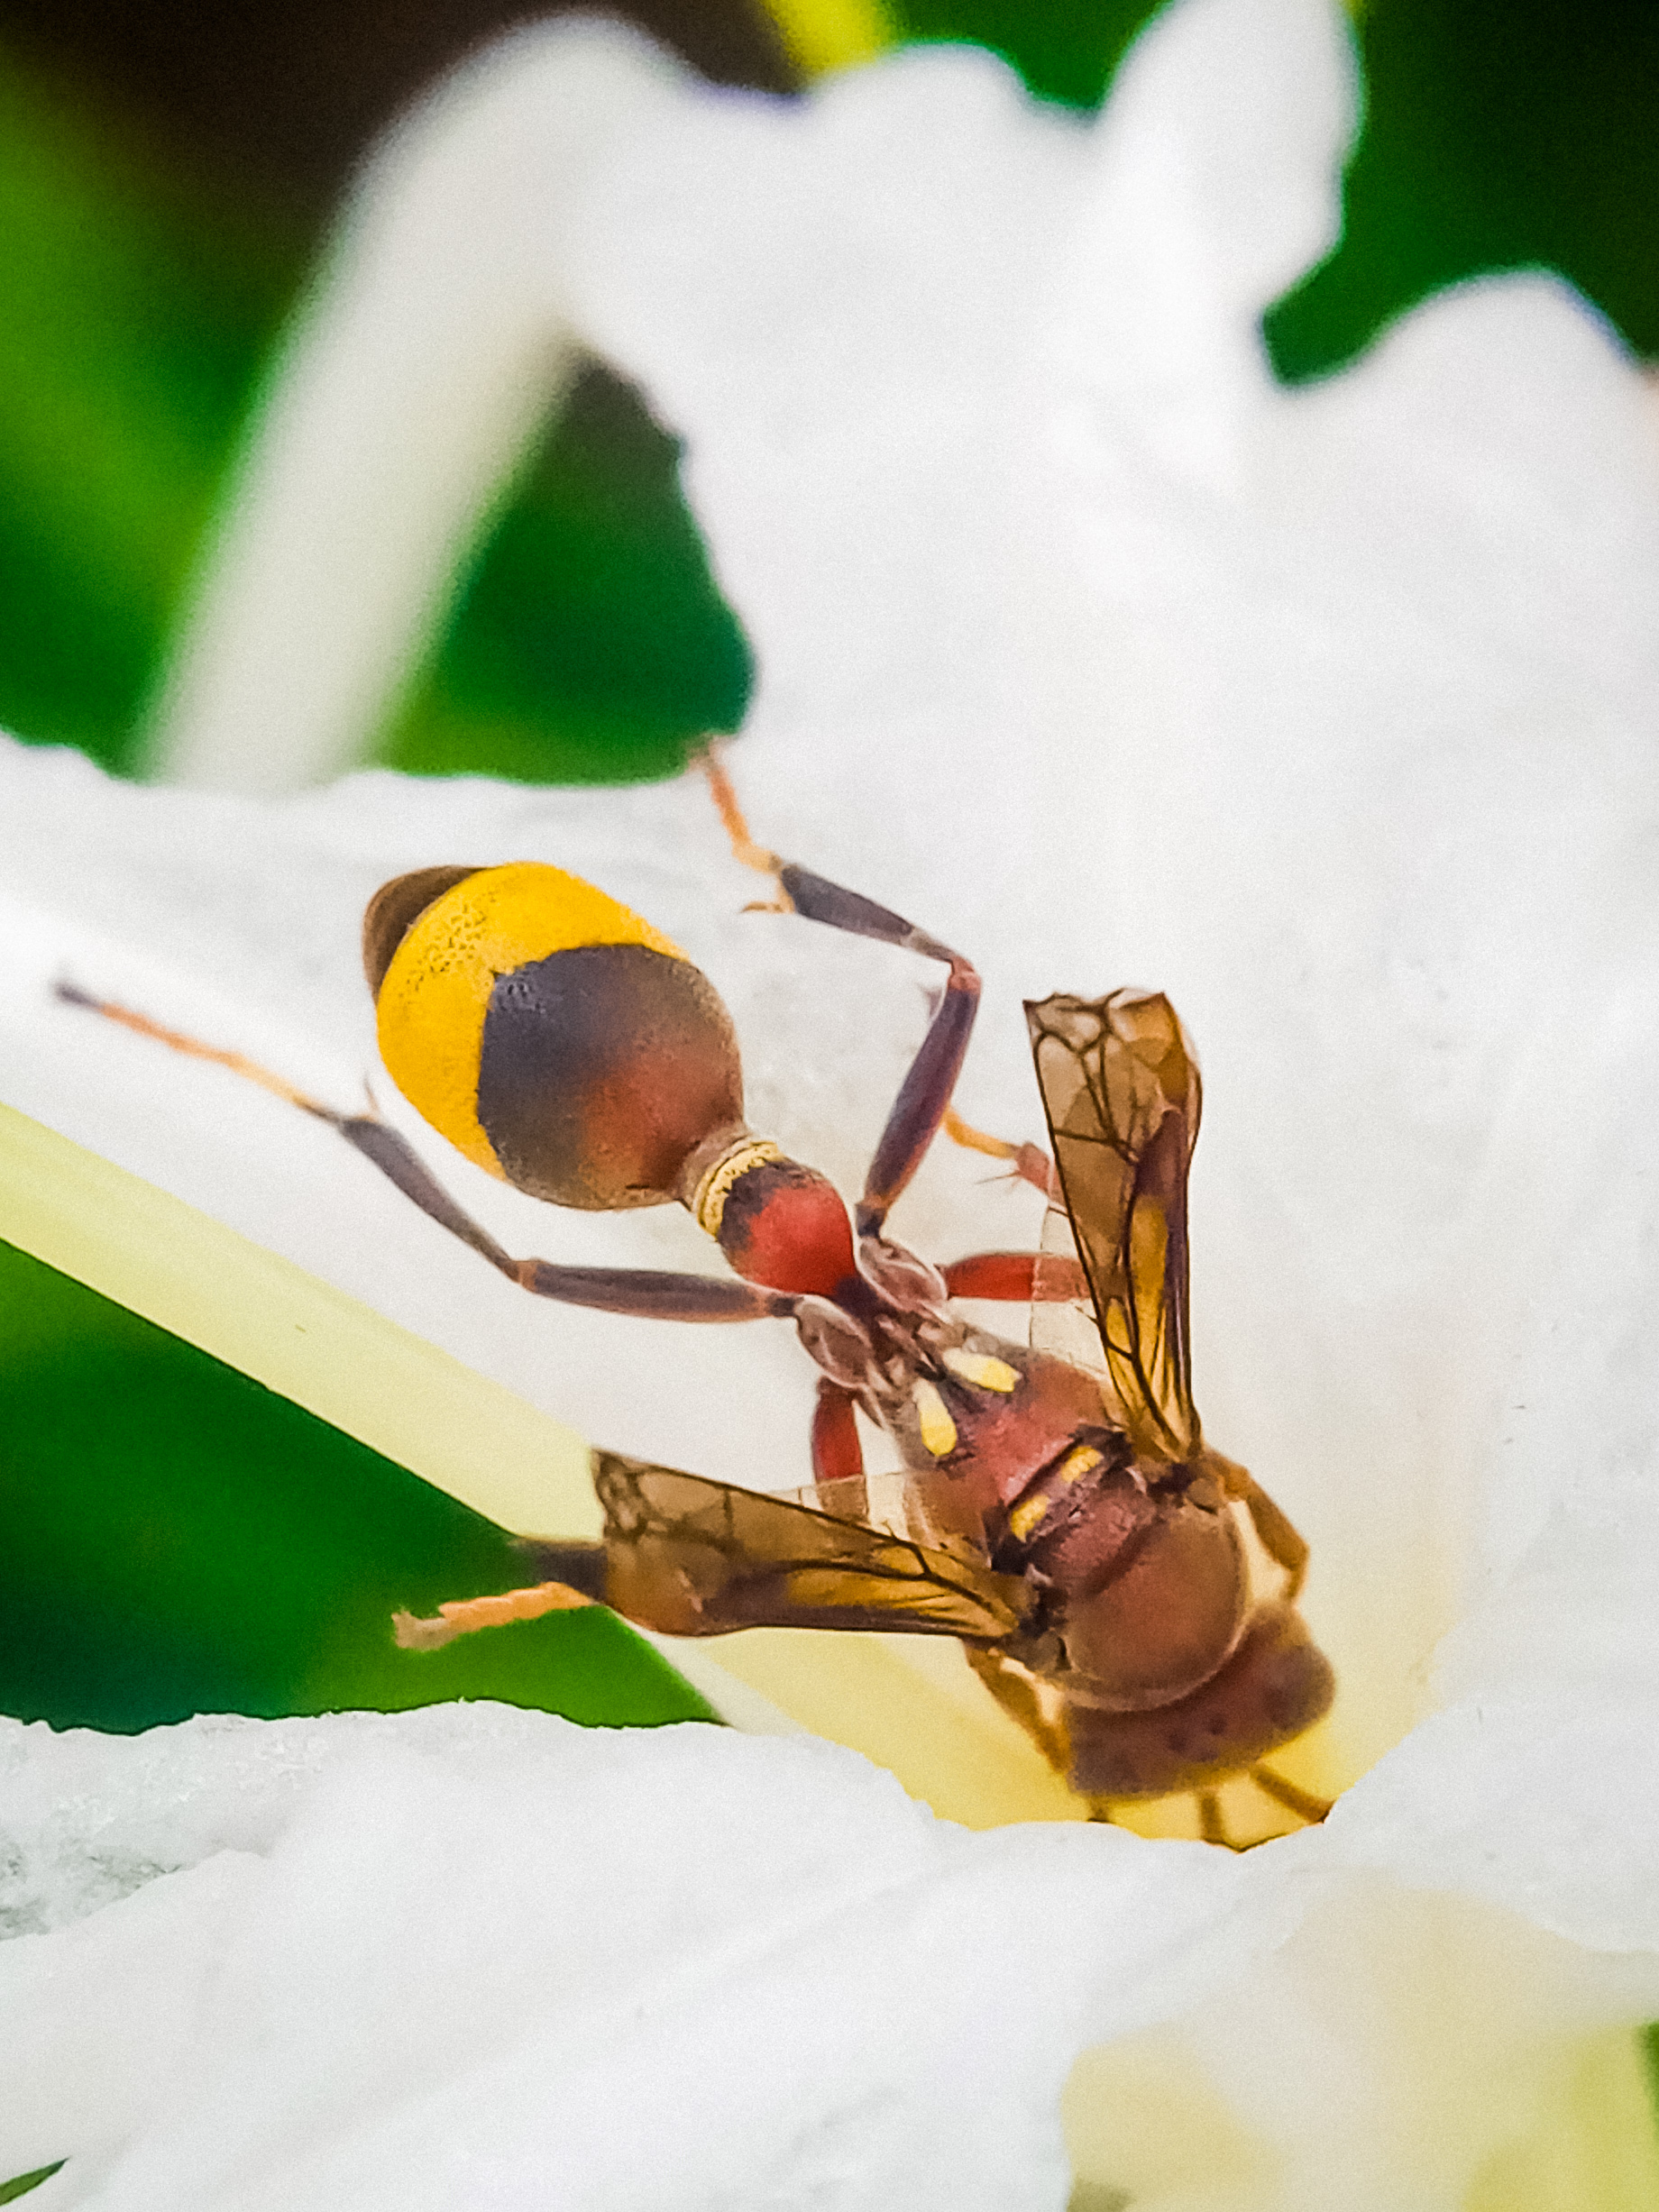 A wasp on a plant